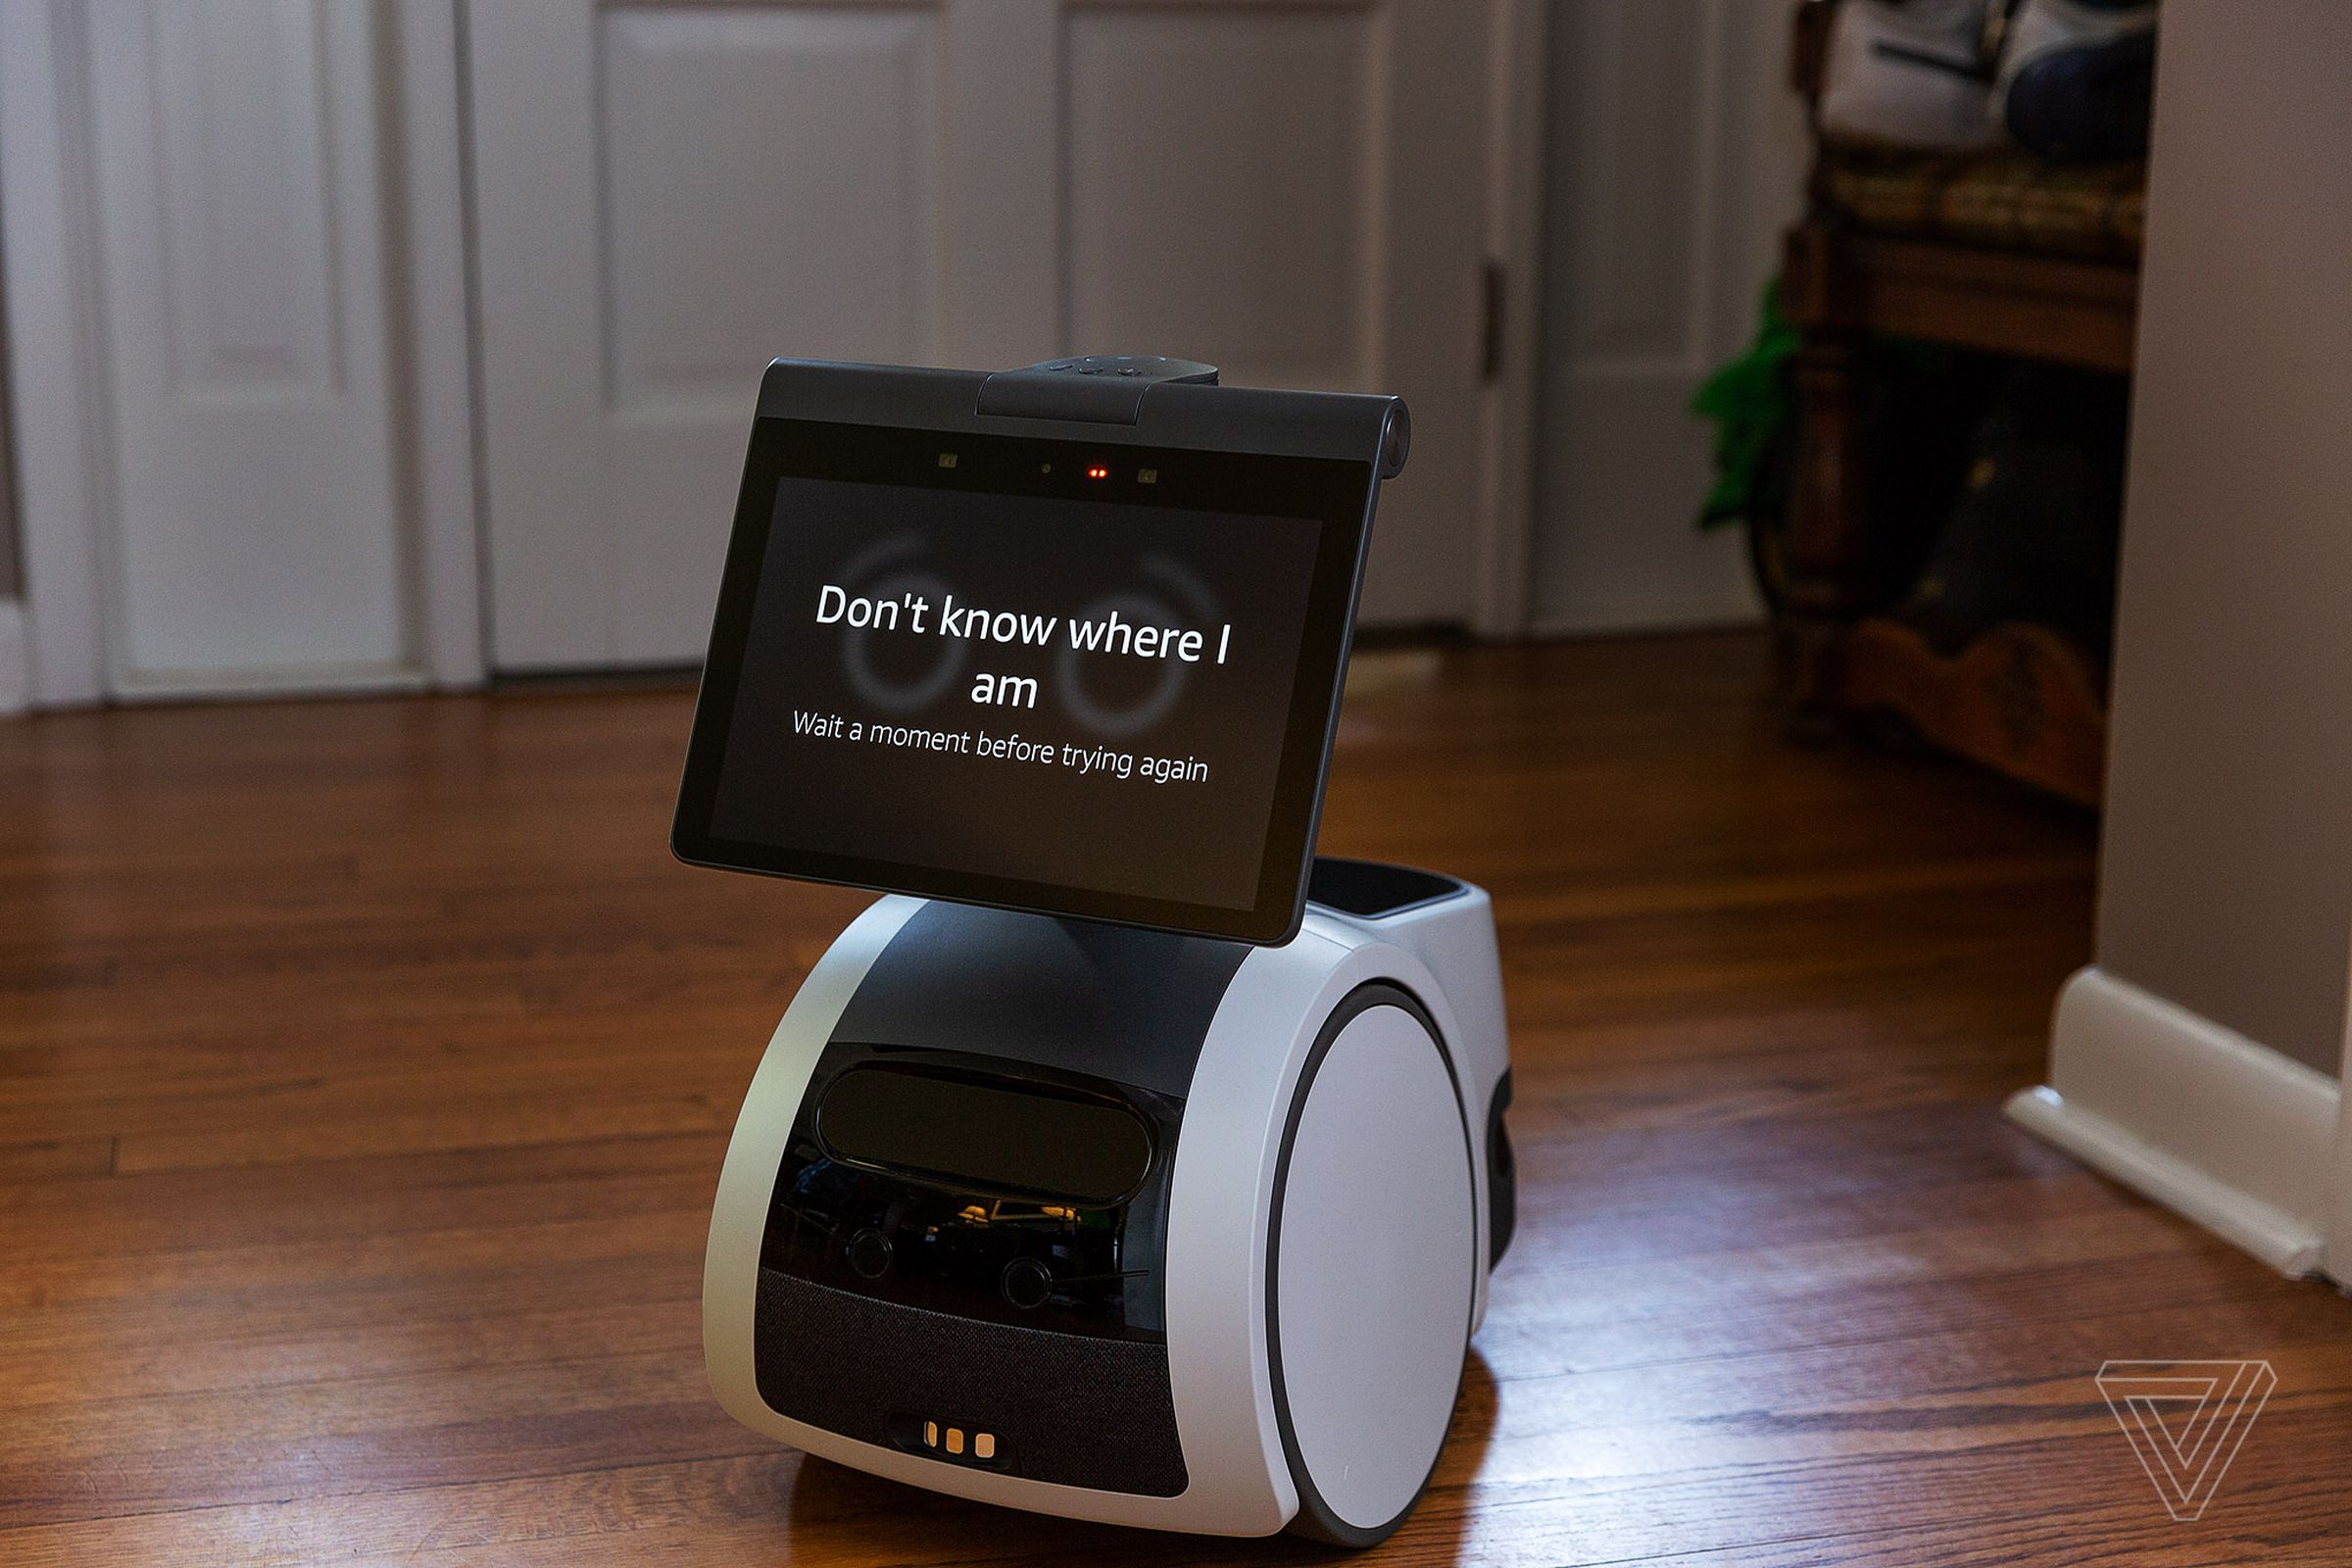 amazon’s astro robot on a wooden floor with its screen / face saying “don’t know where I am, wait a moment before trying again”